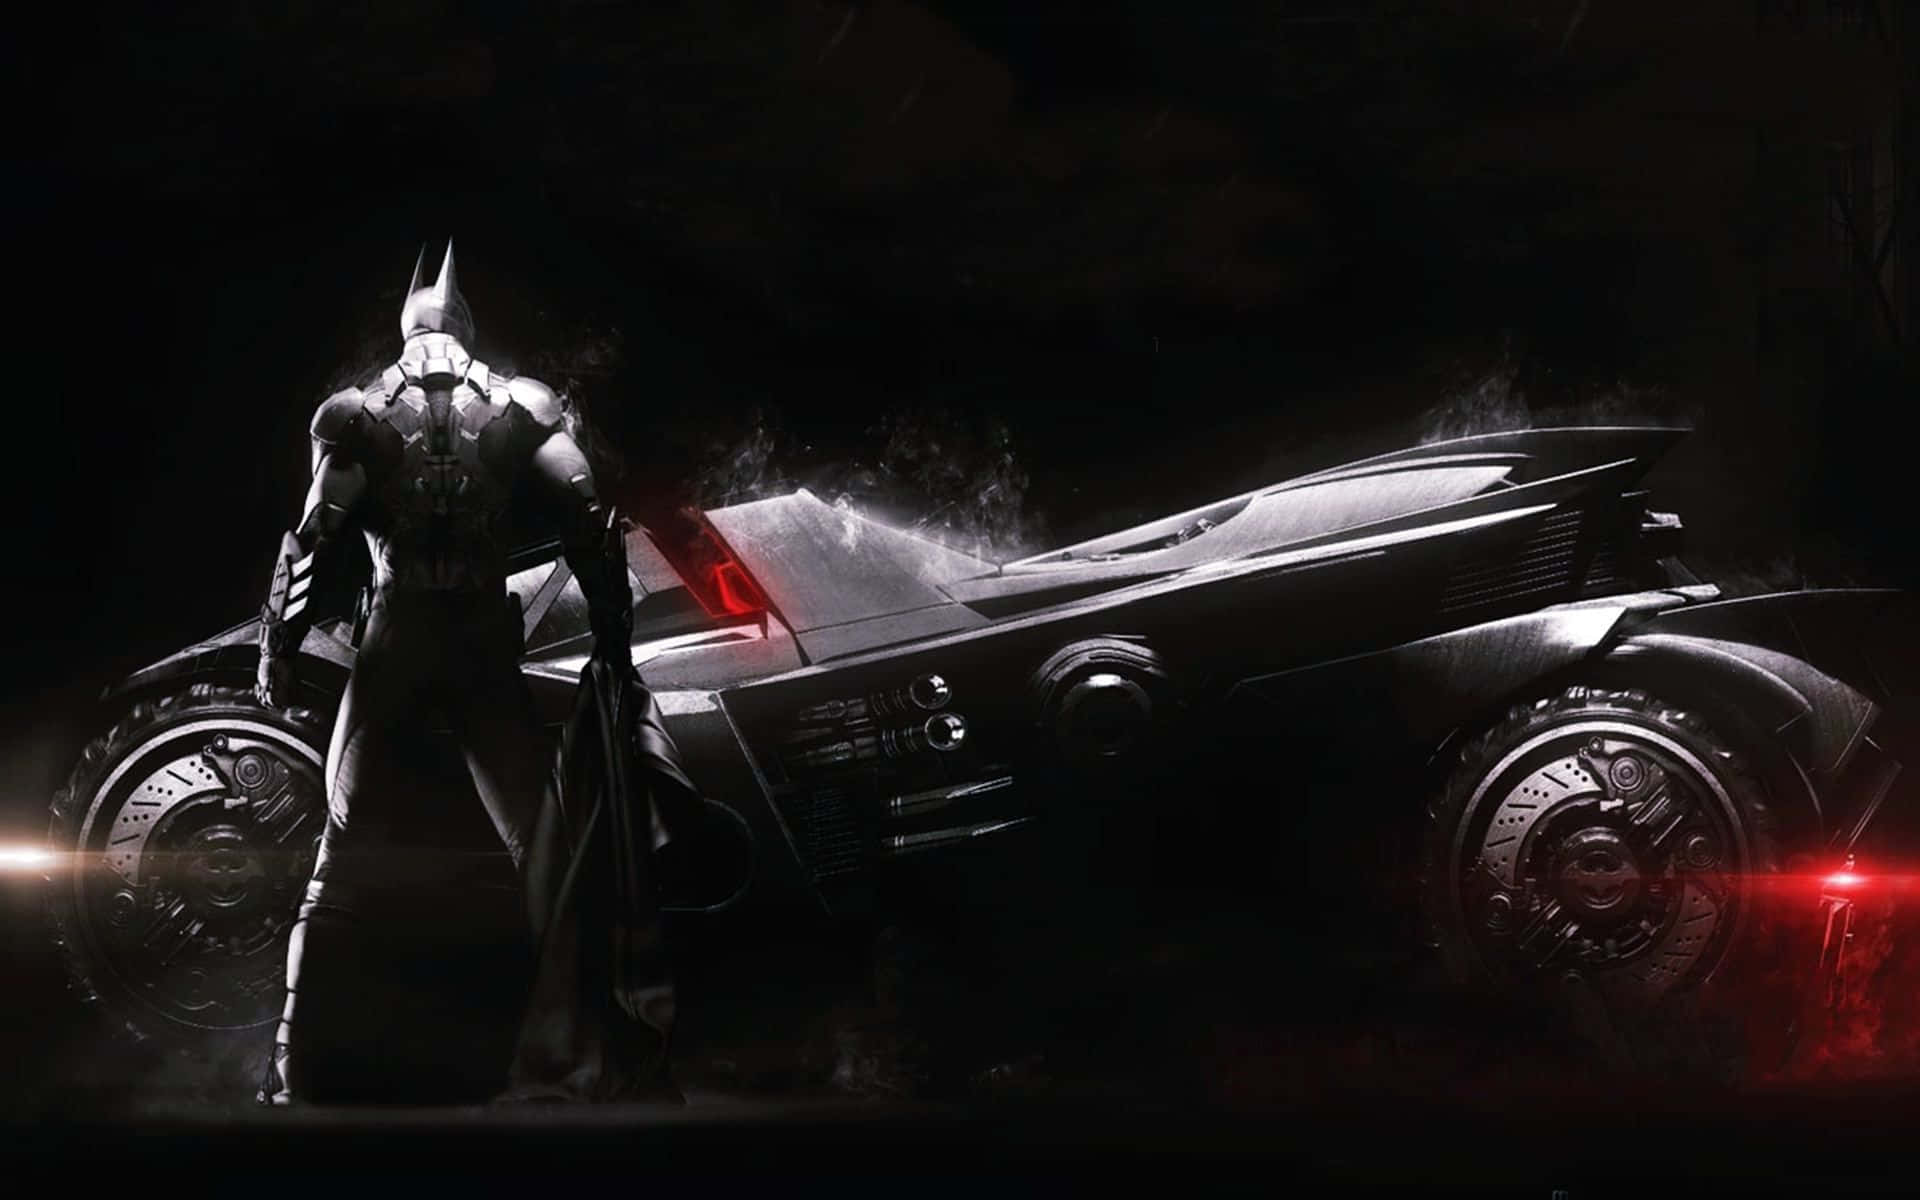 Emblazoned with a fierce impact, the Batmobile roars down the street ready for battle. Wallpaper